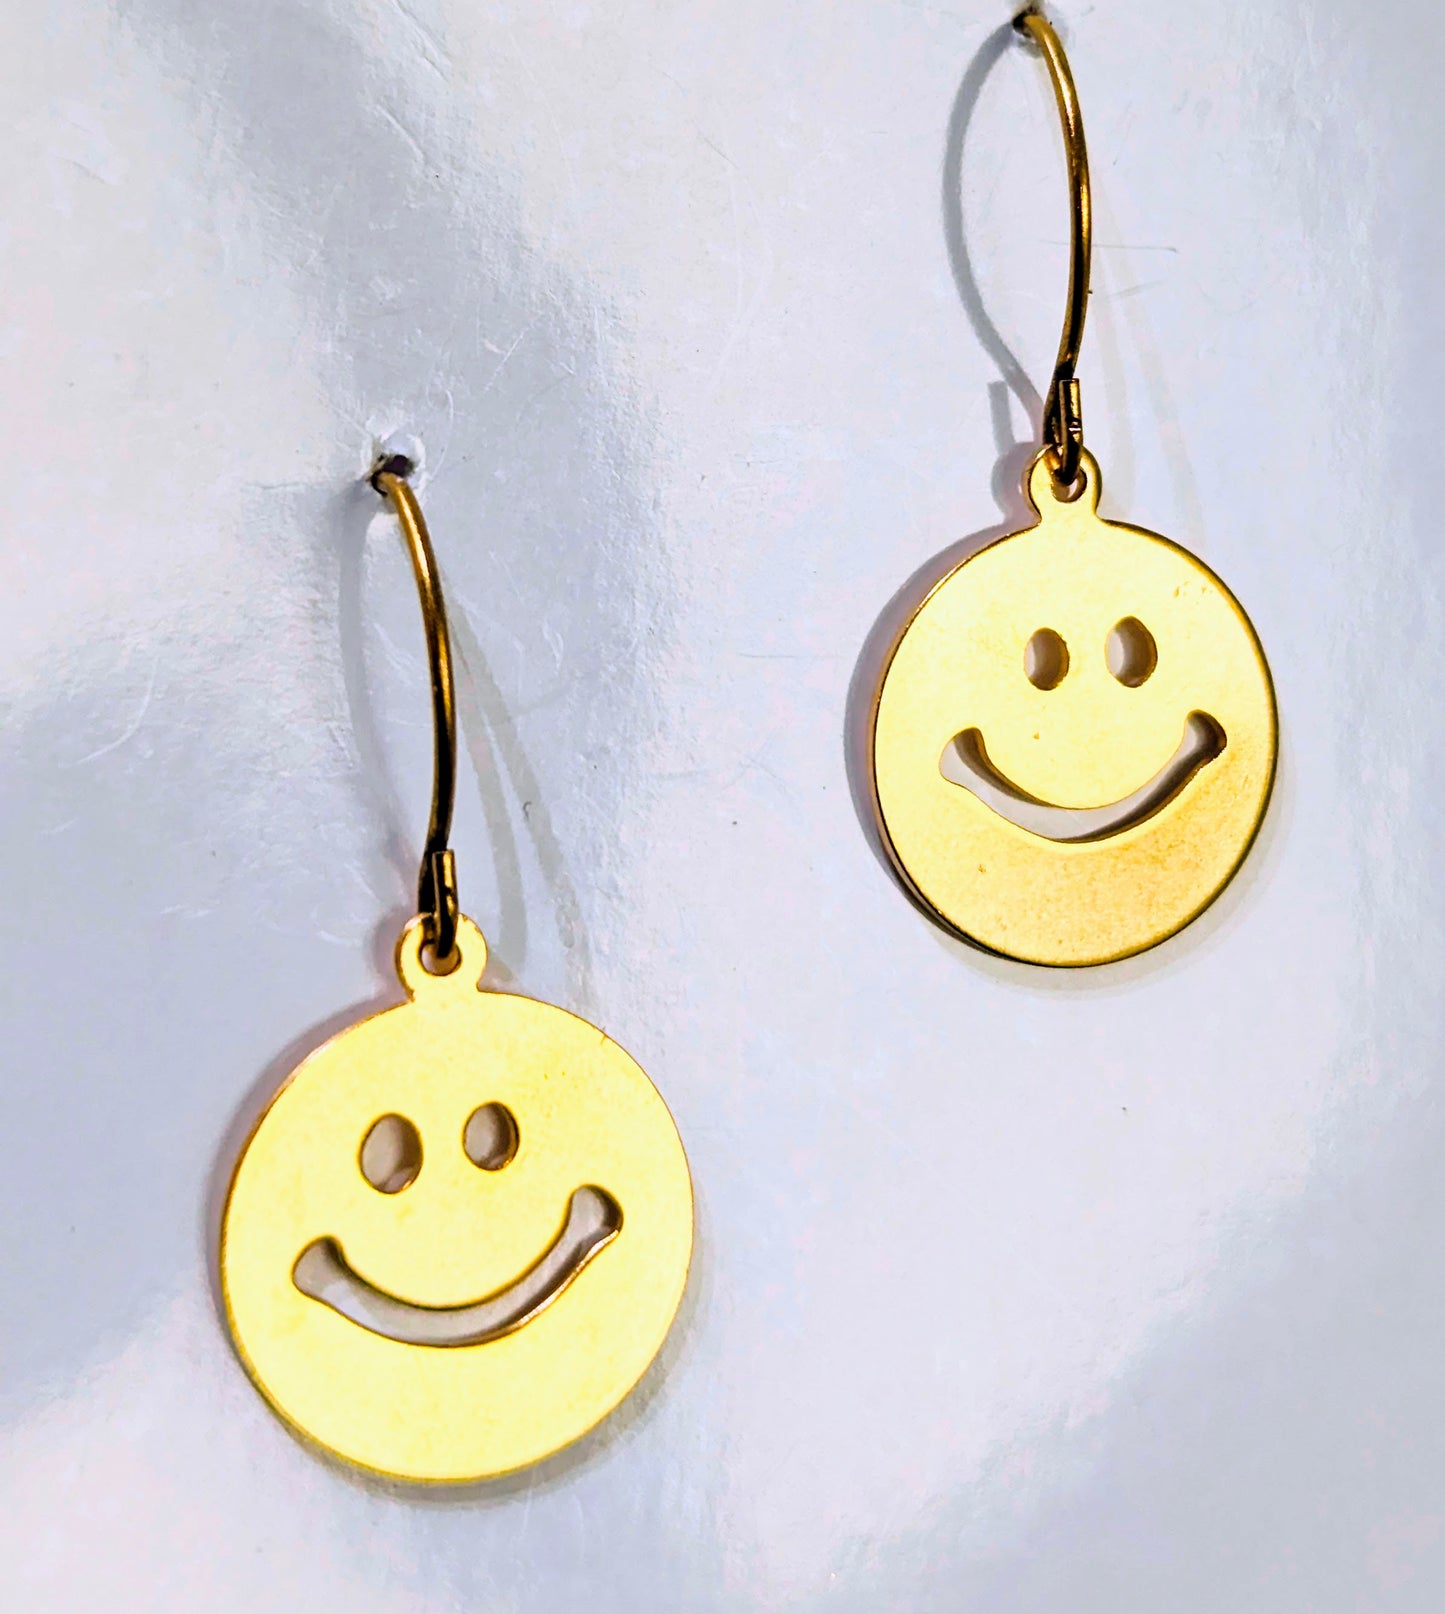 24k Gold Smile Earrings Plated 1.5 inch Long USA Made by Sugar Gay Isber unisex-adult Be Happy